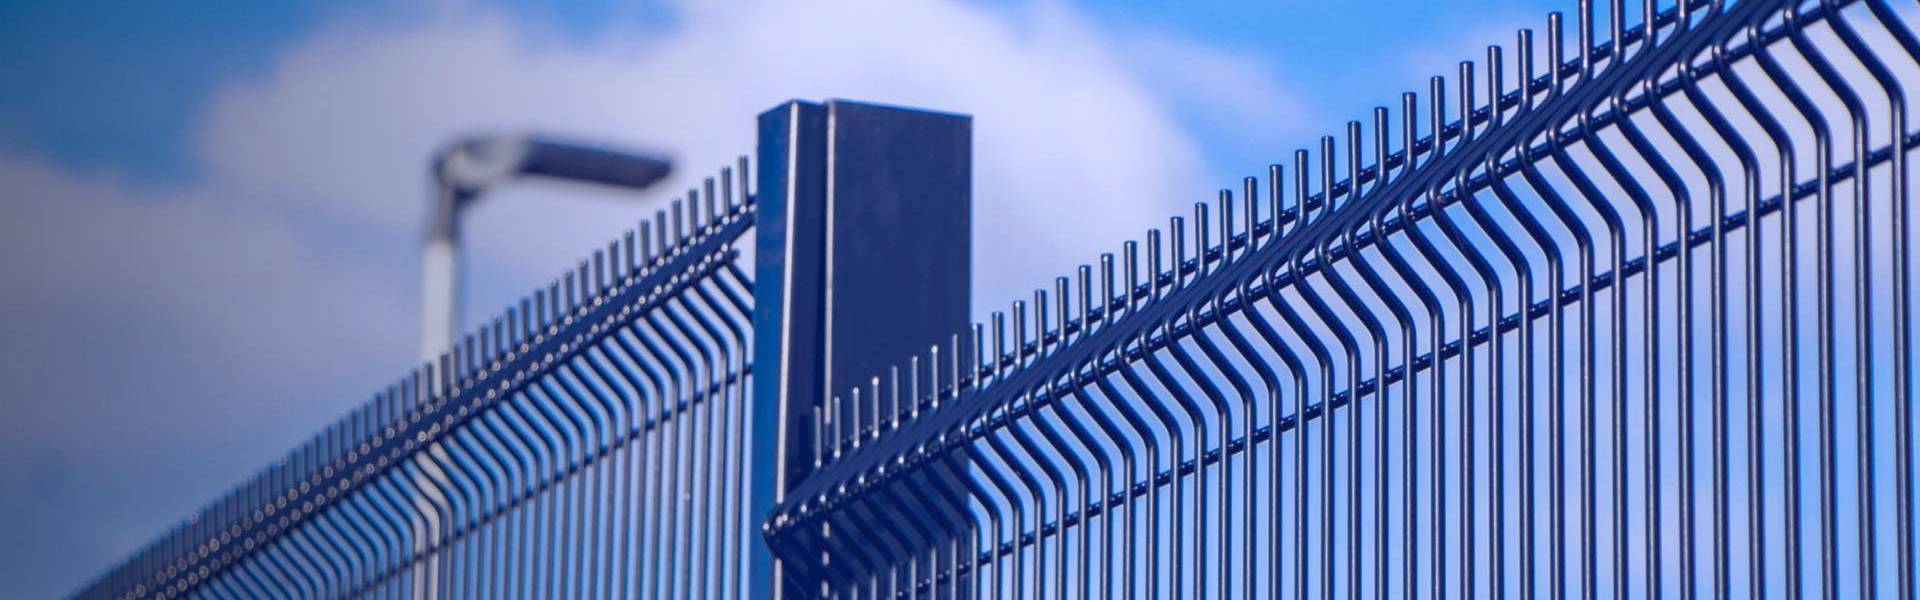 3D security fence under blue sky and white clouds